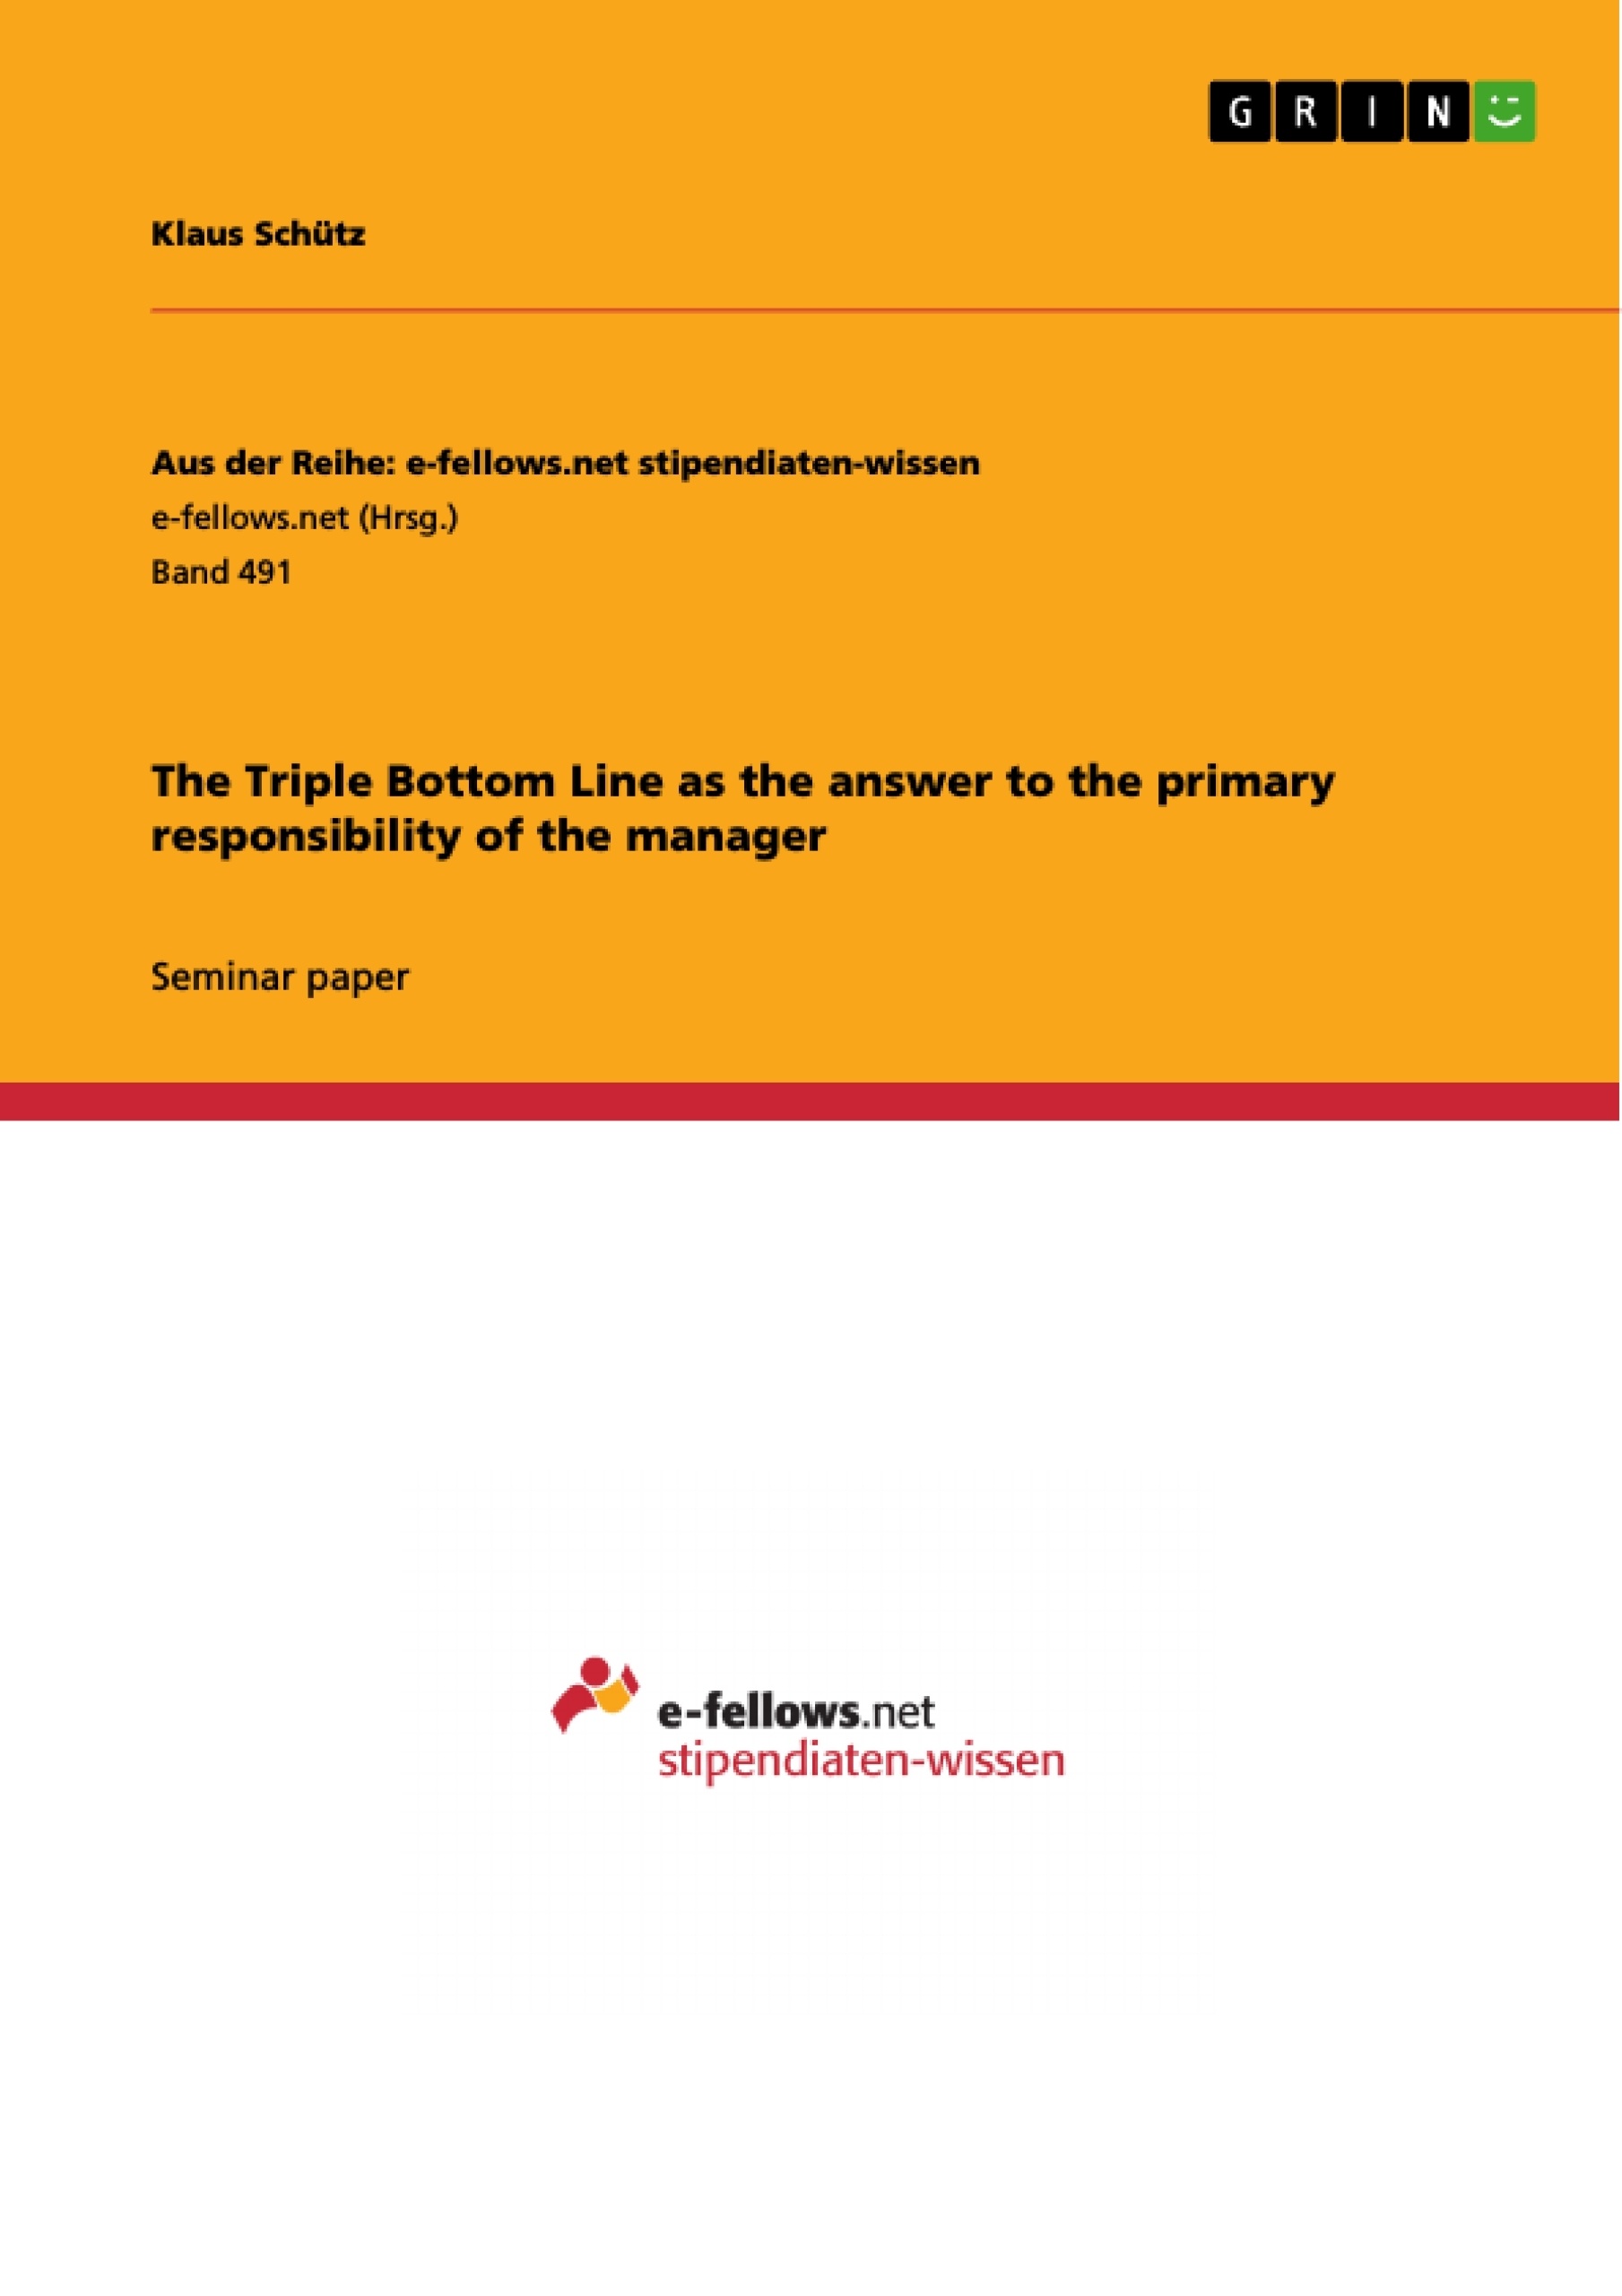 Title: The Triple Bottom Line as the answer to the primary responsibility of the manager